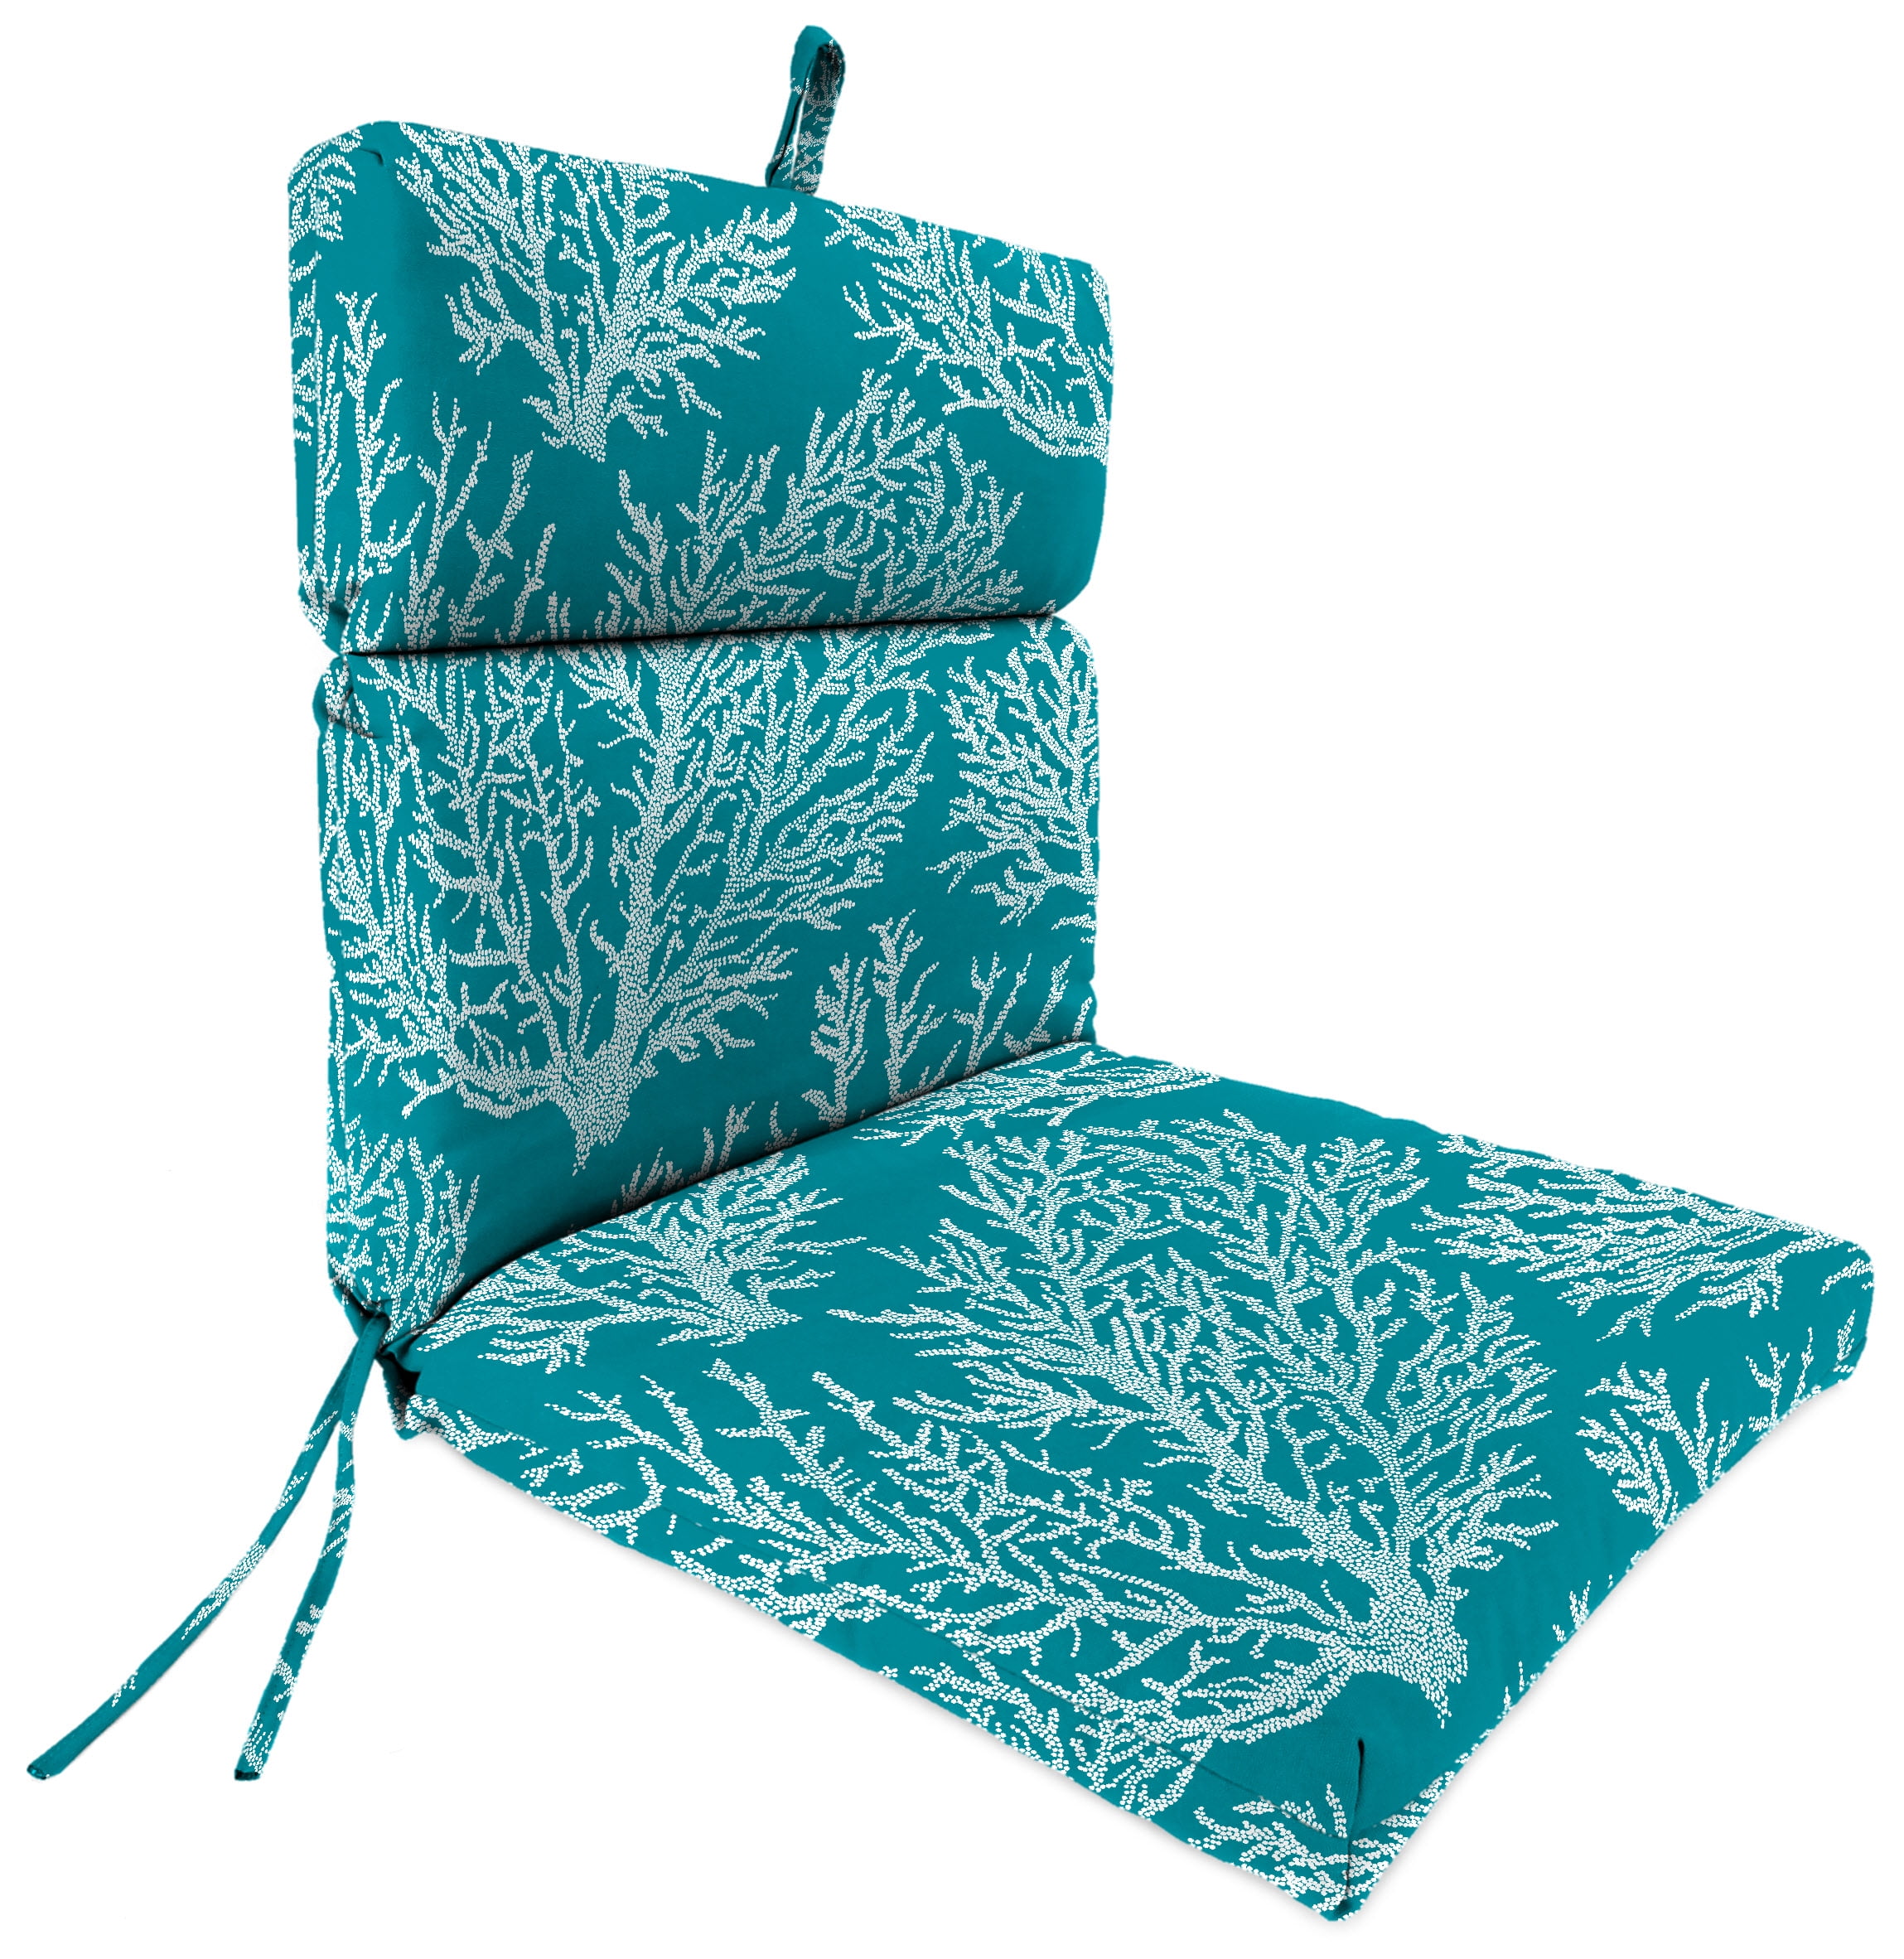 blue outdoor cushions sale